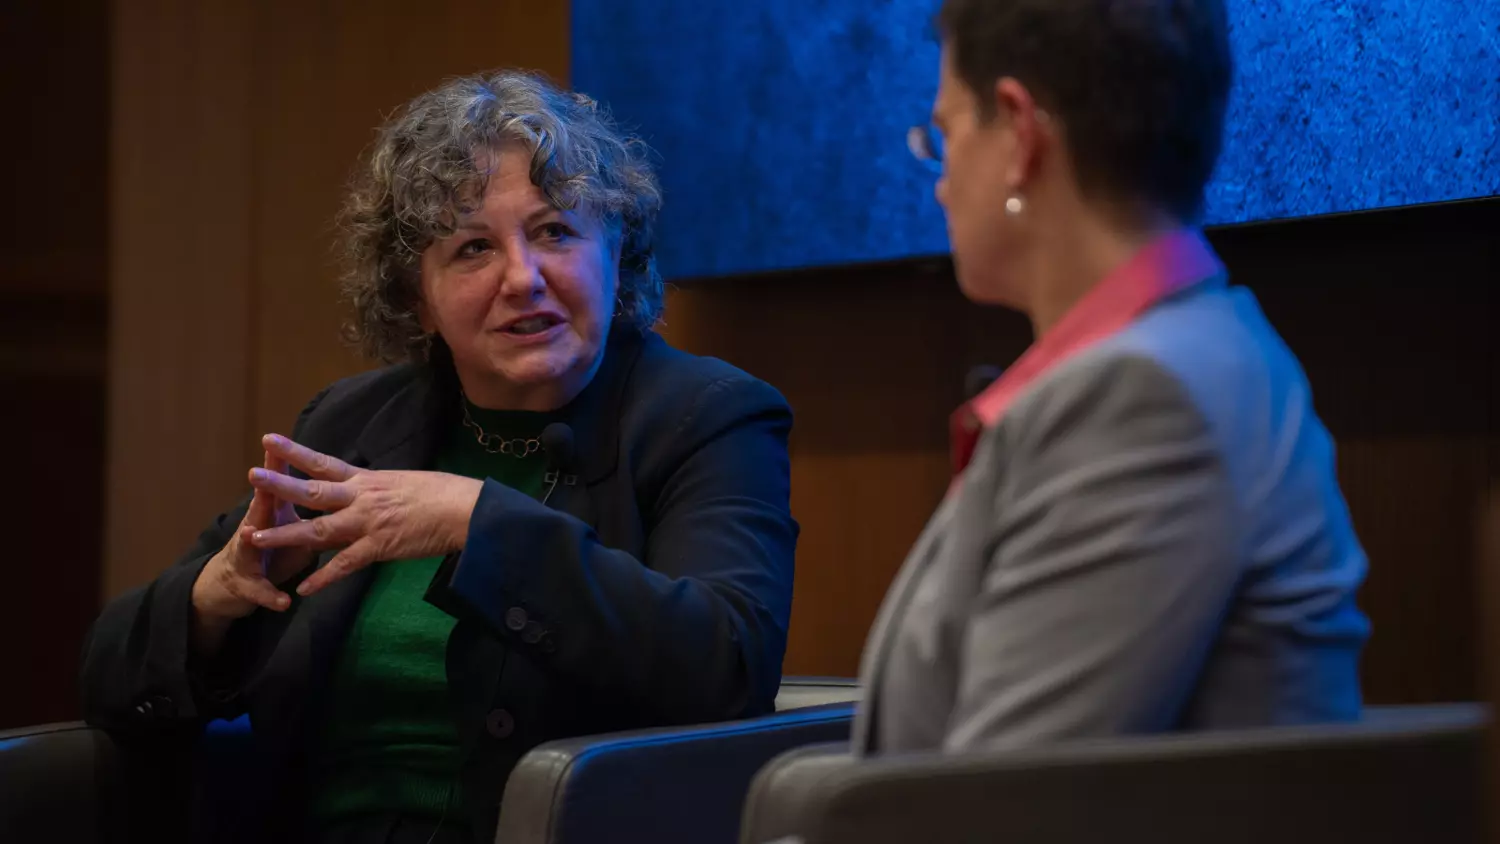 Political scientist Michele Lamont during her talk at the Munk School